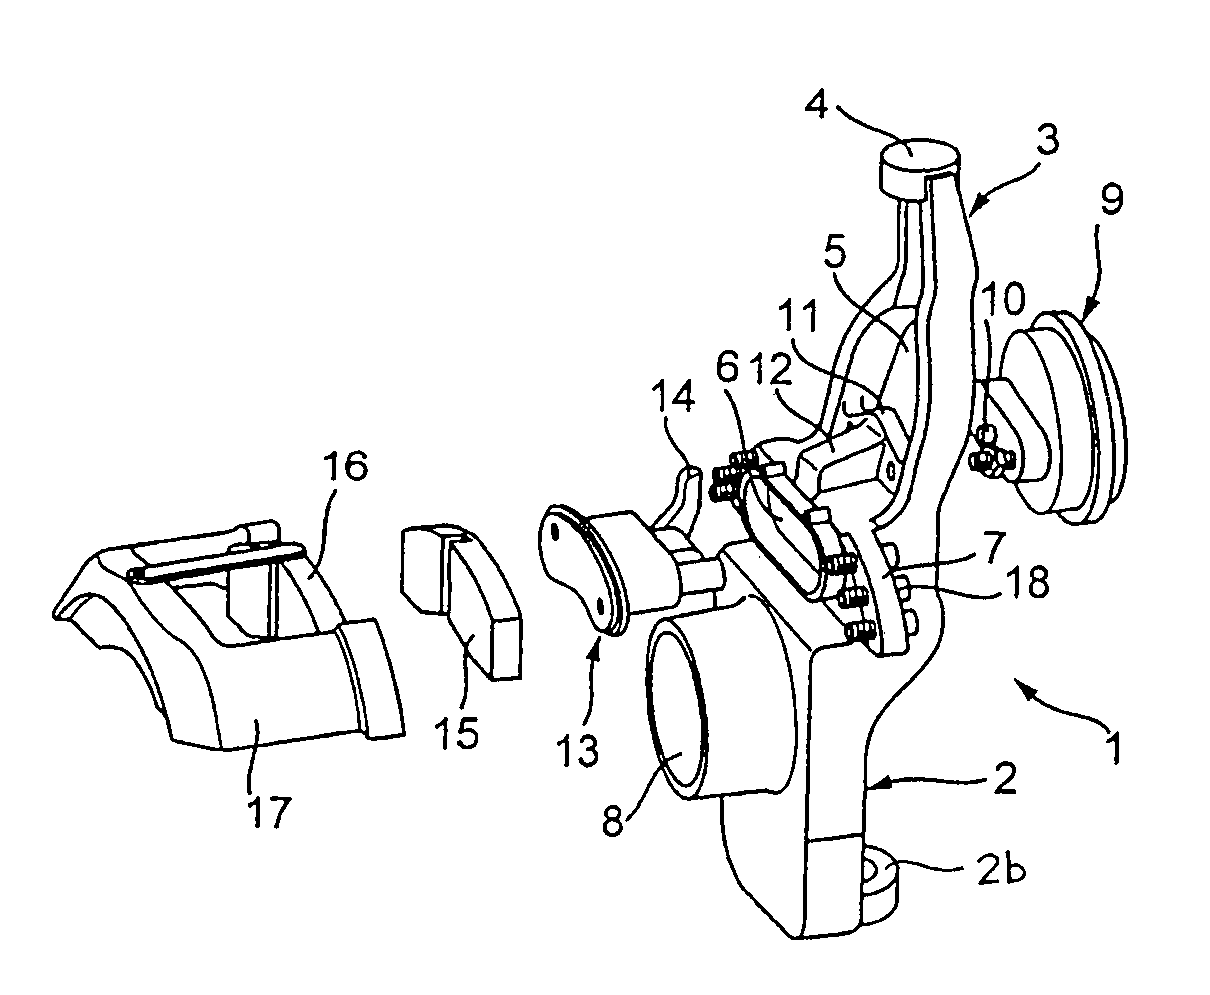 Wheel carrier unit comprising an integrated brake application unit